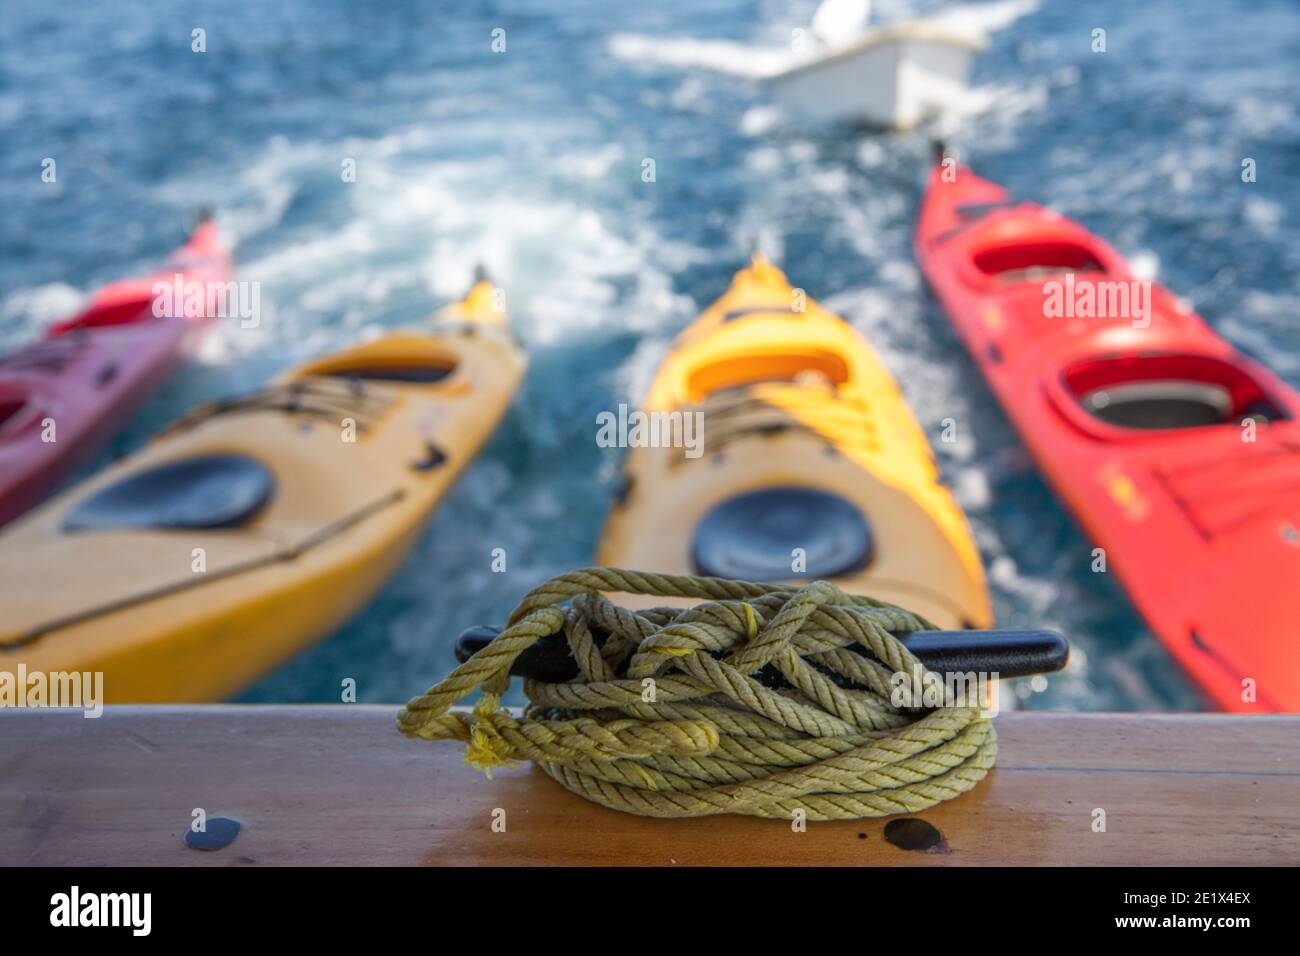 colorful Kayaks bound together towed by a ship and some sailing ropes in the foreground Stock Photo